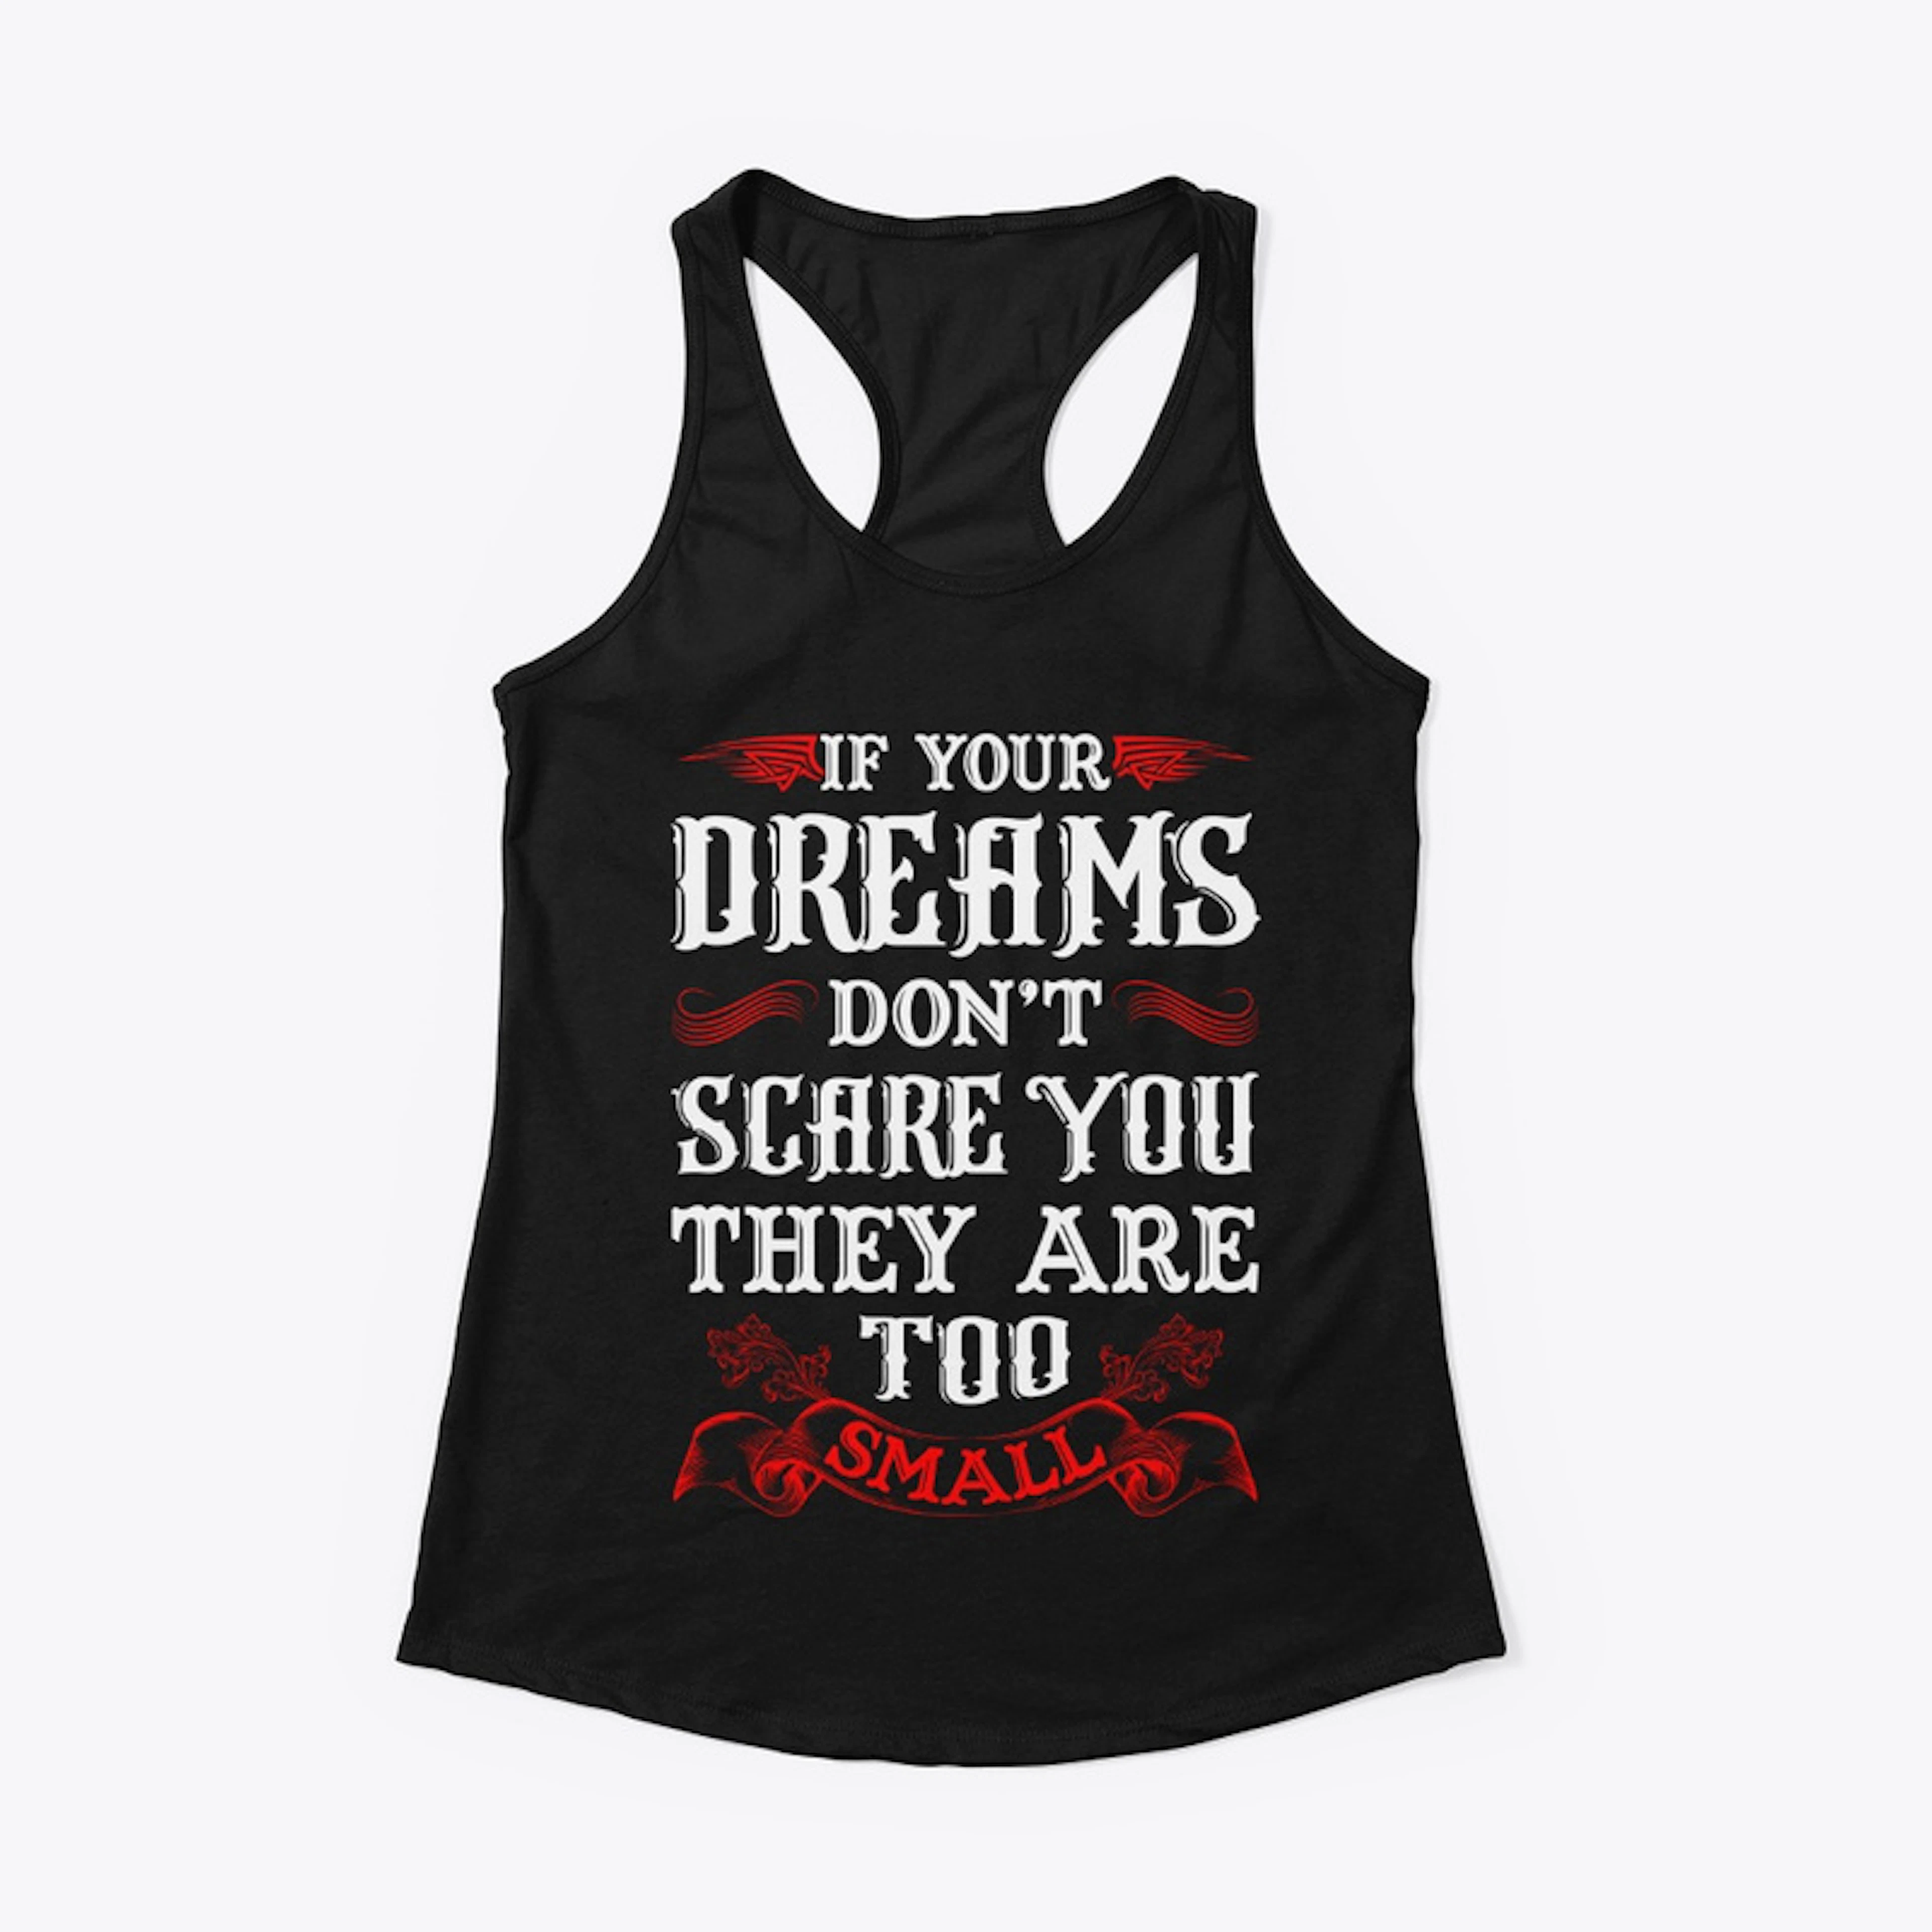 If your dreams don't scare you tee